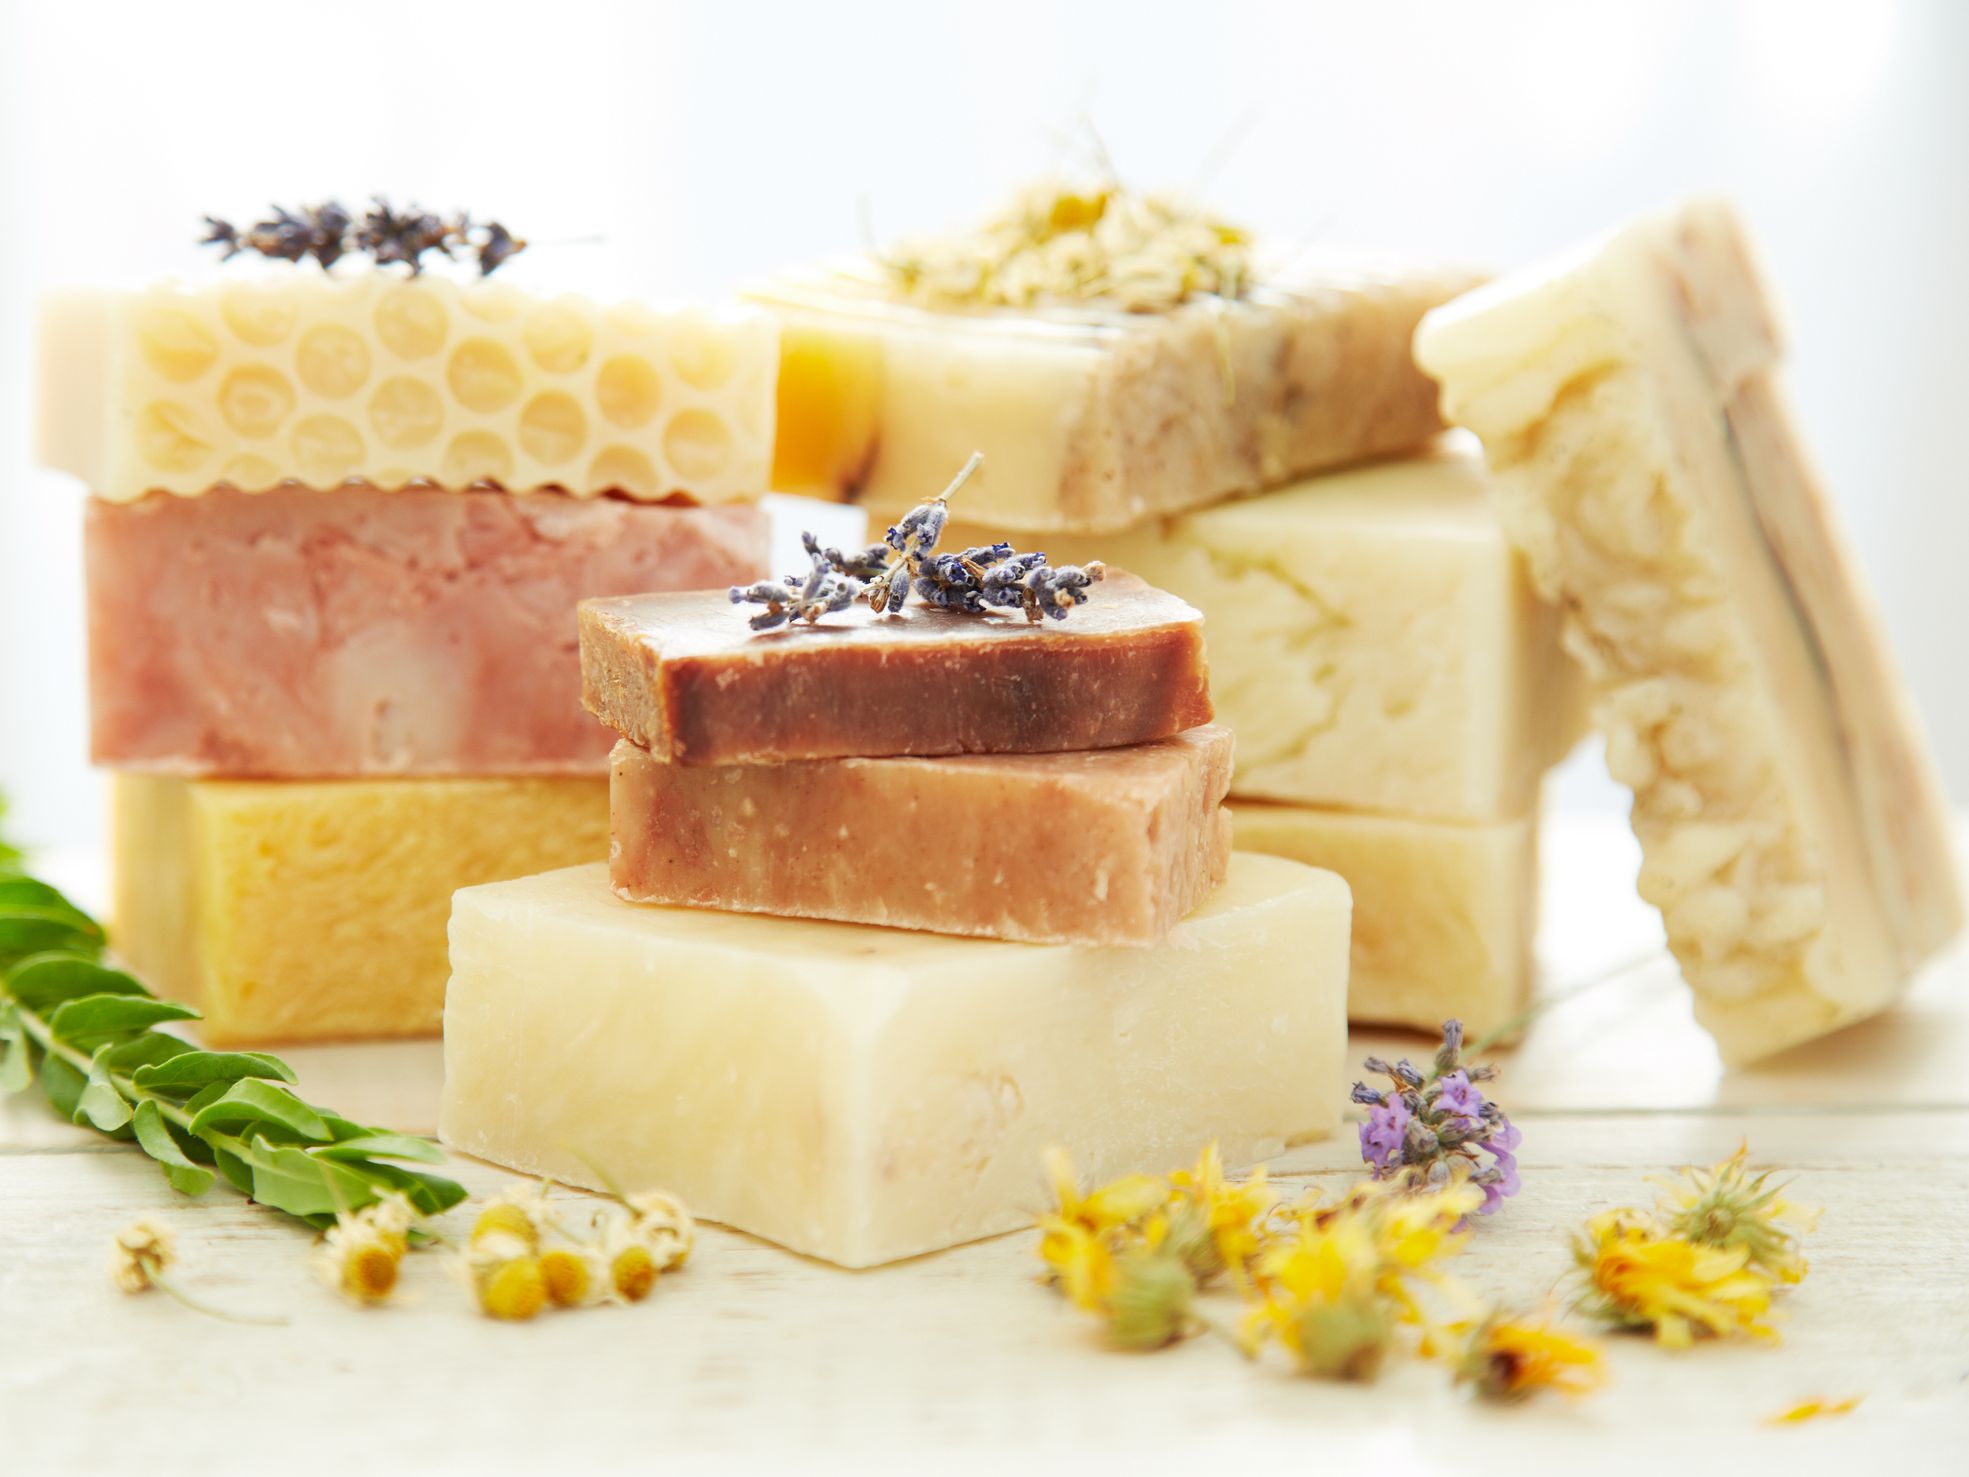 Homemadeorganicsoap-GettyImages-169946754-5909fd915f9b586470f2908e